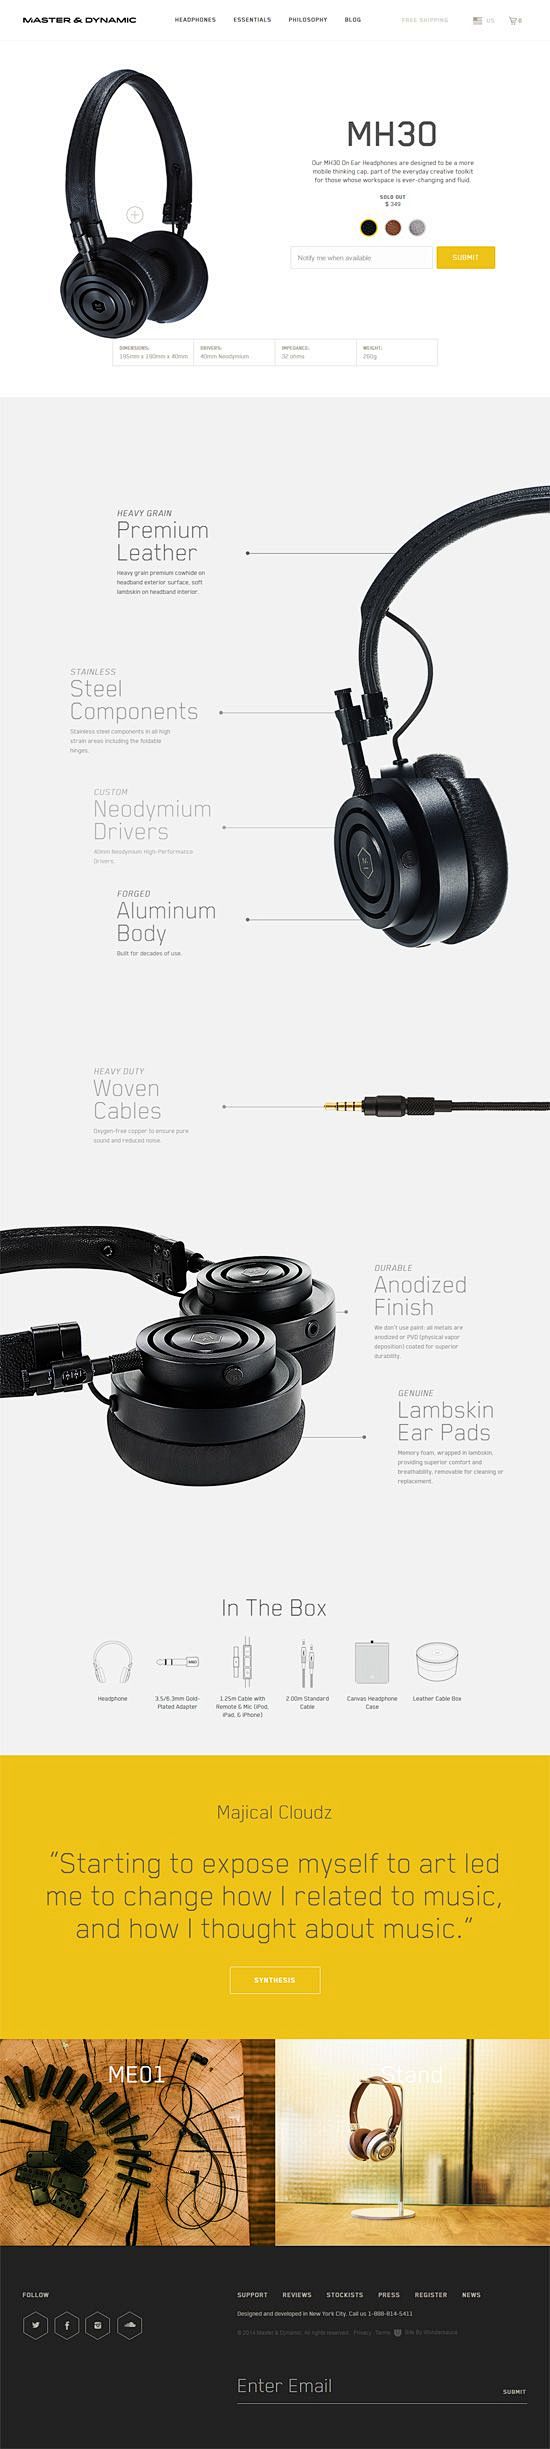 Product page design:...